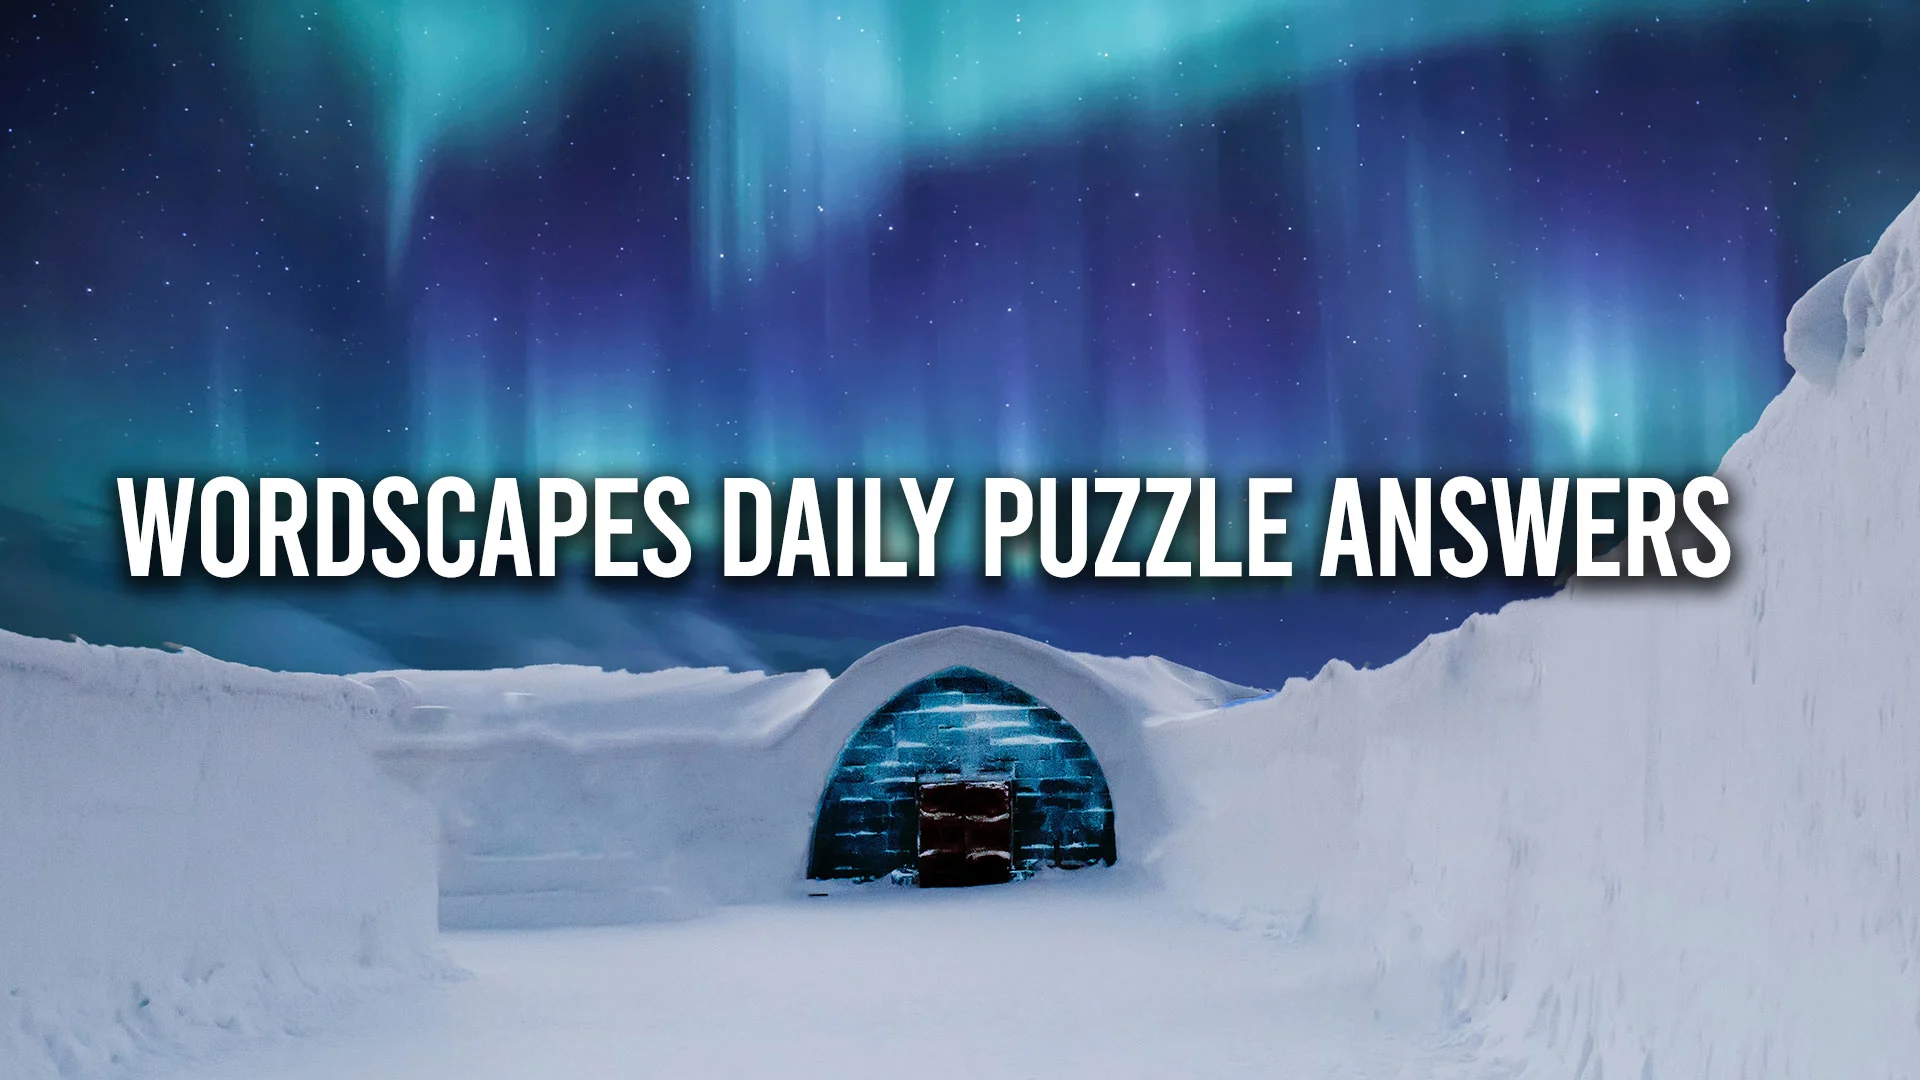 Wordscapes Daily Puzzle Answers